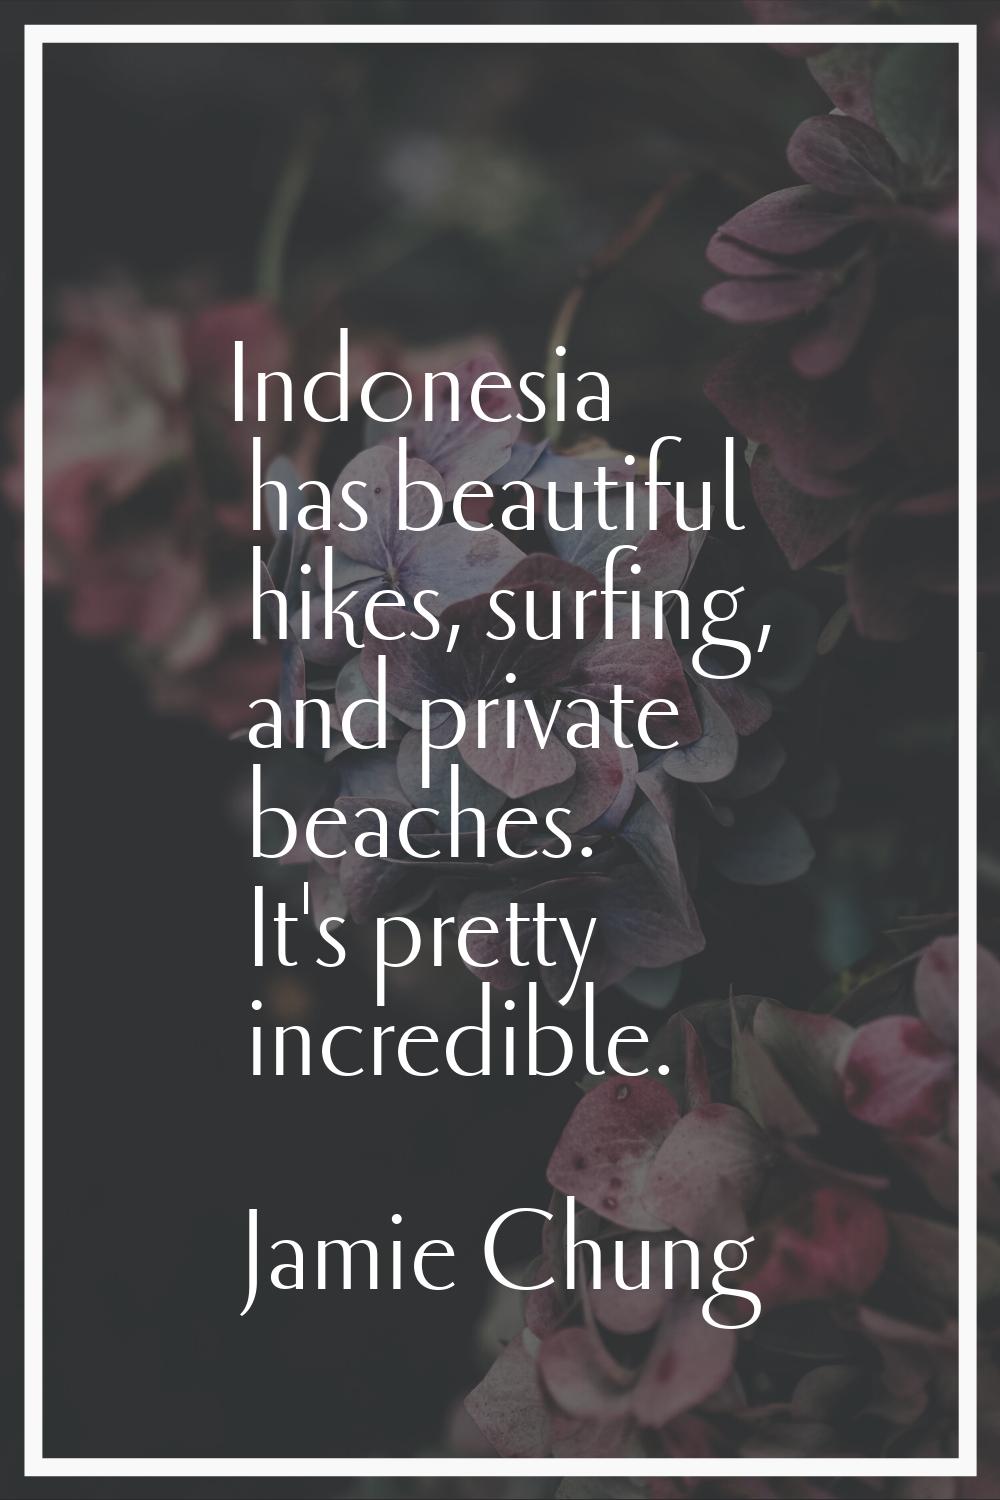 Indonesia has beautiful hikes, surfing, and private beaches. It's pretty incredible.